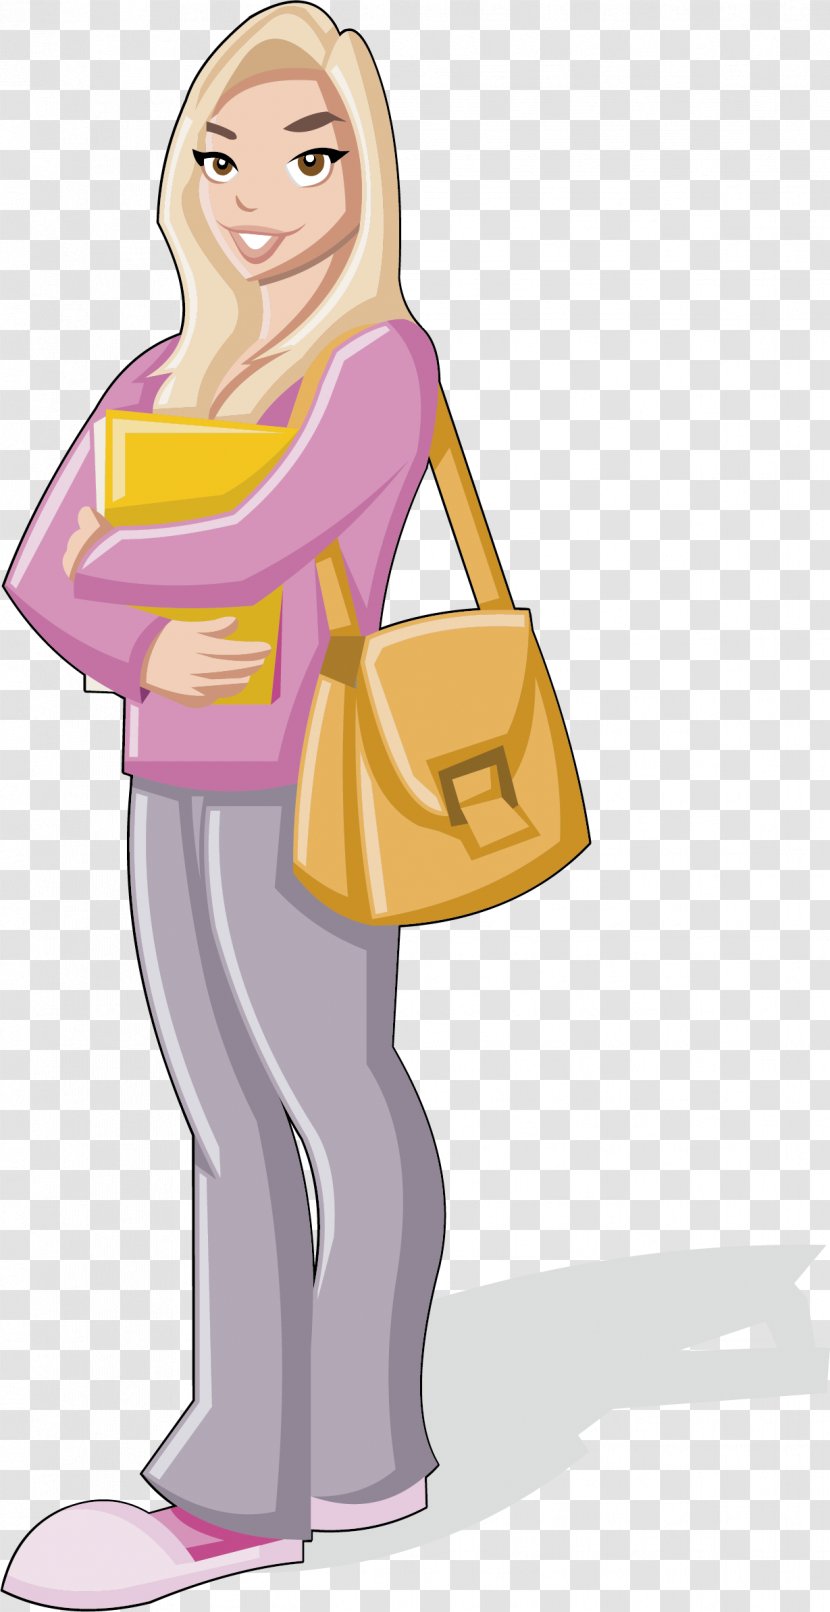 Student Cartoon Woman Illustration - Silhouette - A Rich Who Goes To School Transparent PNG